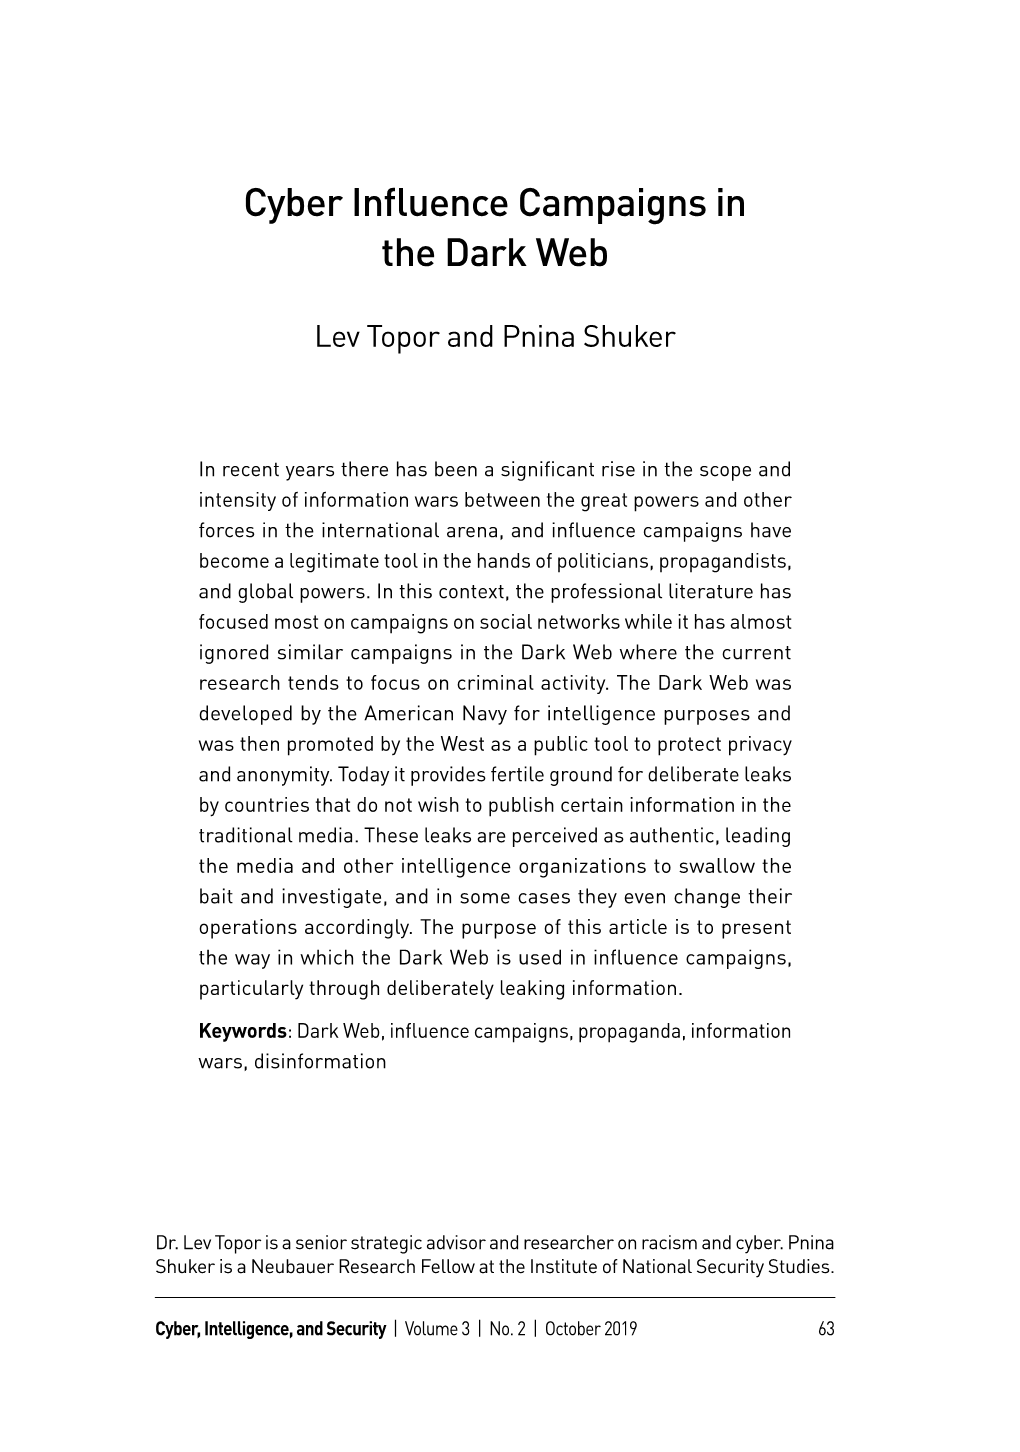 Cyber Influence Campaigns in the Dark Web